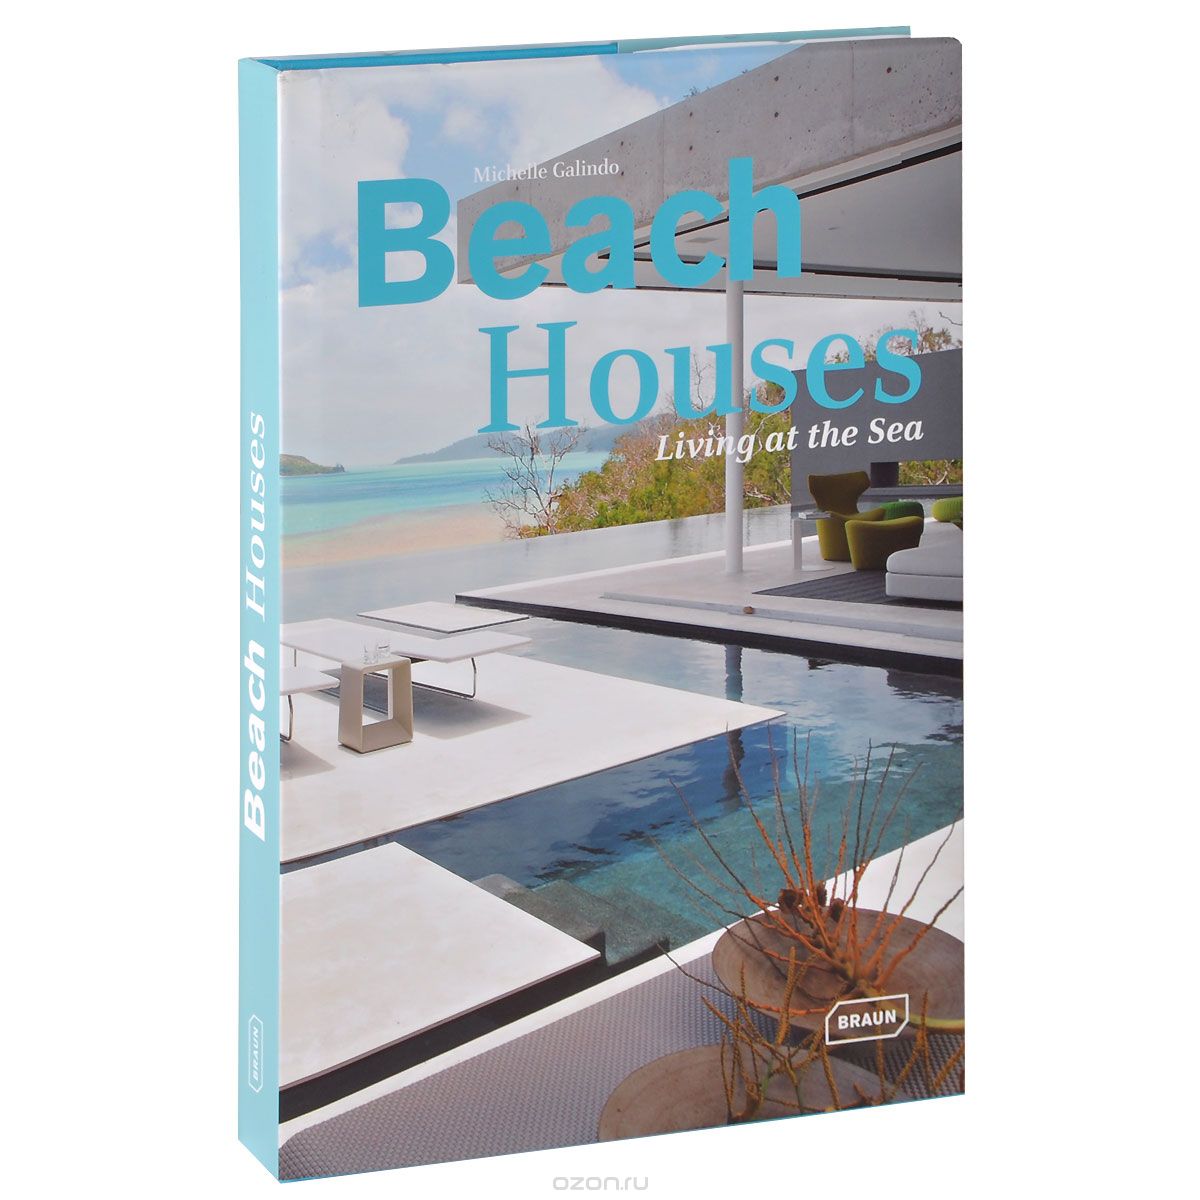 Beach Houses: Living at the Sea